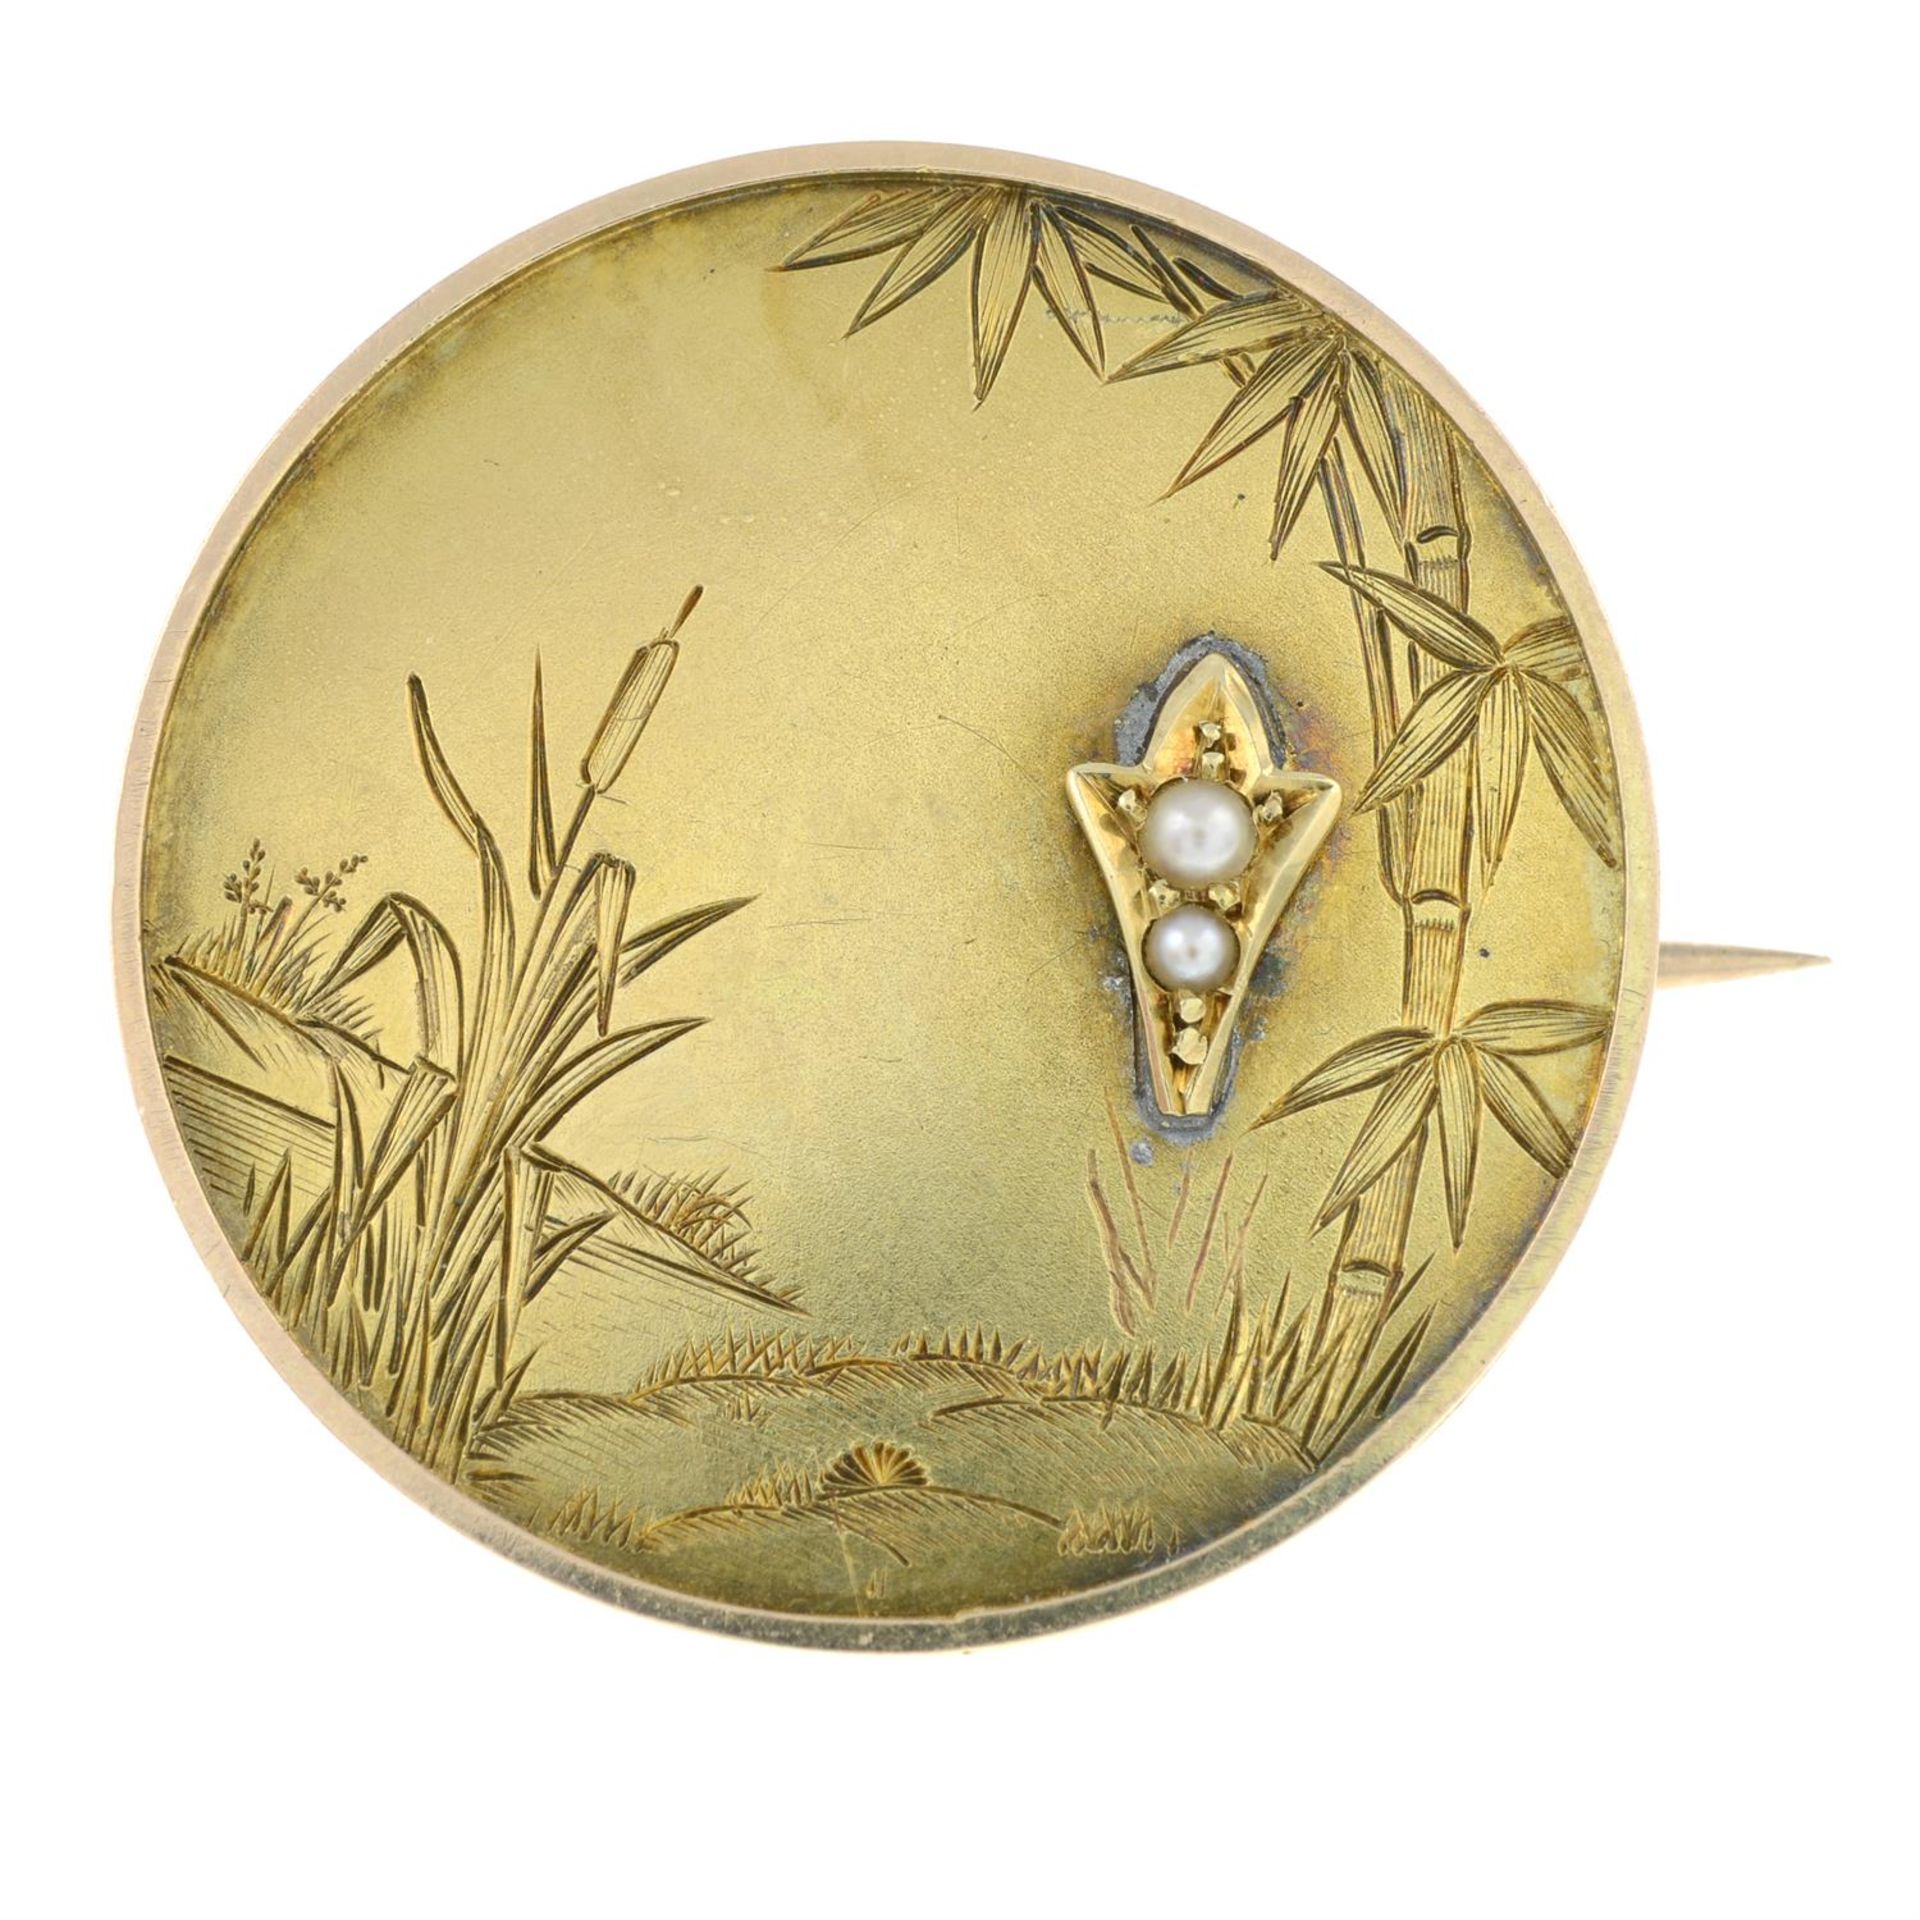 A late 19th century brooch, depicting reeds, with split pearl highlight.